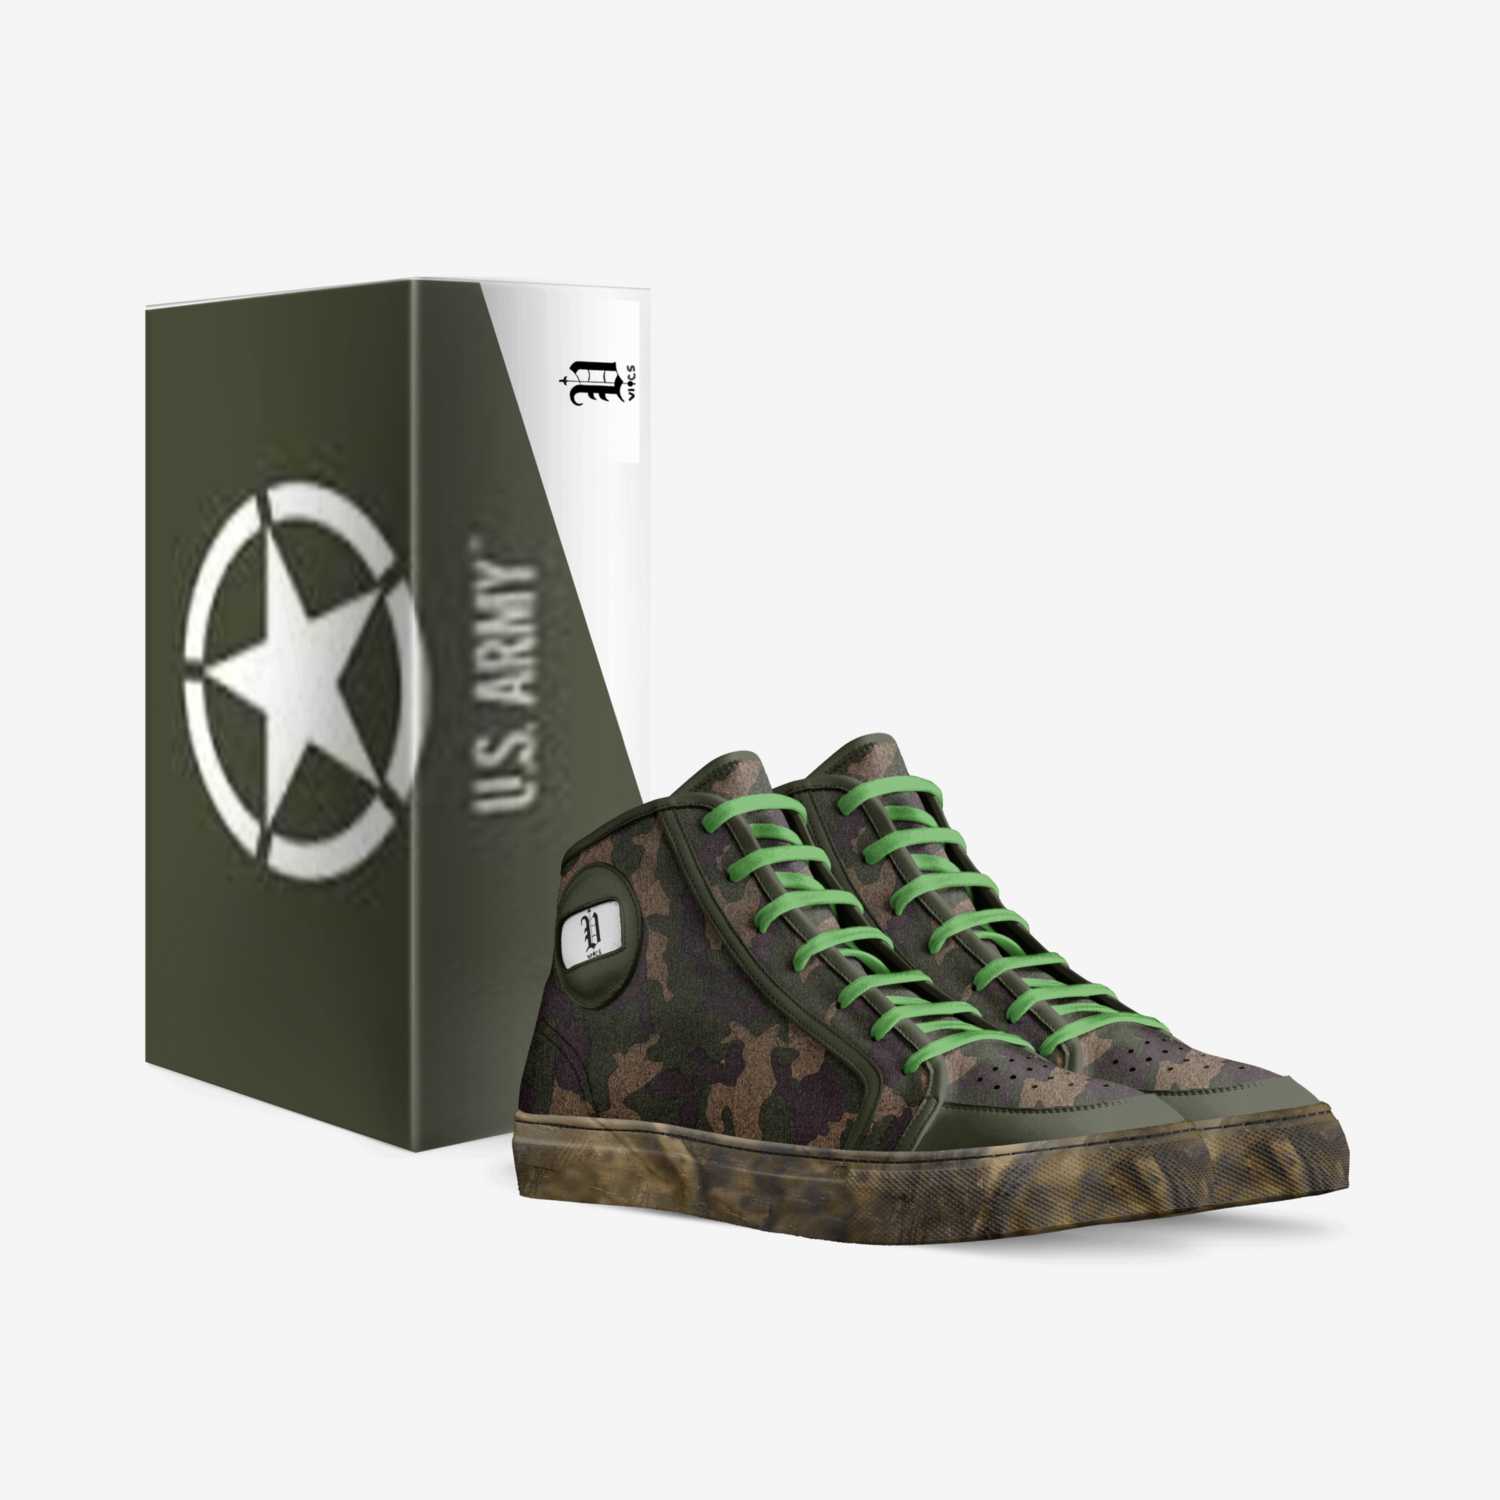 Vics Army custom made in Italy shoes by Brayden Murphy | Box view